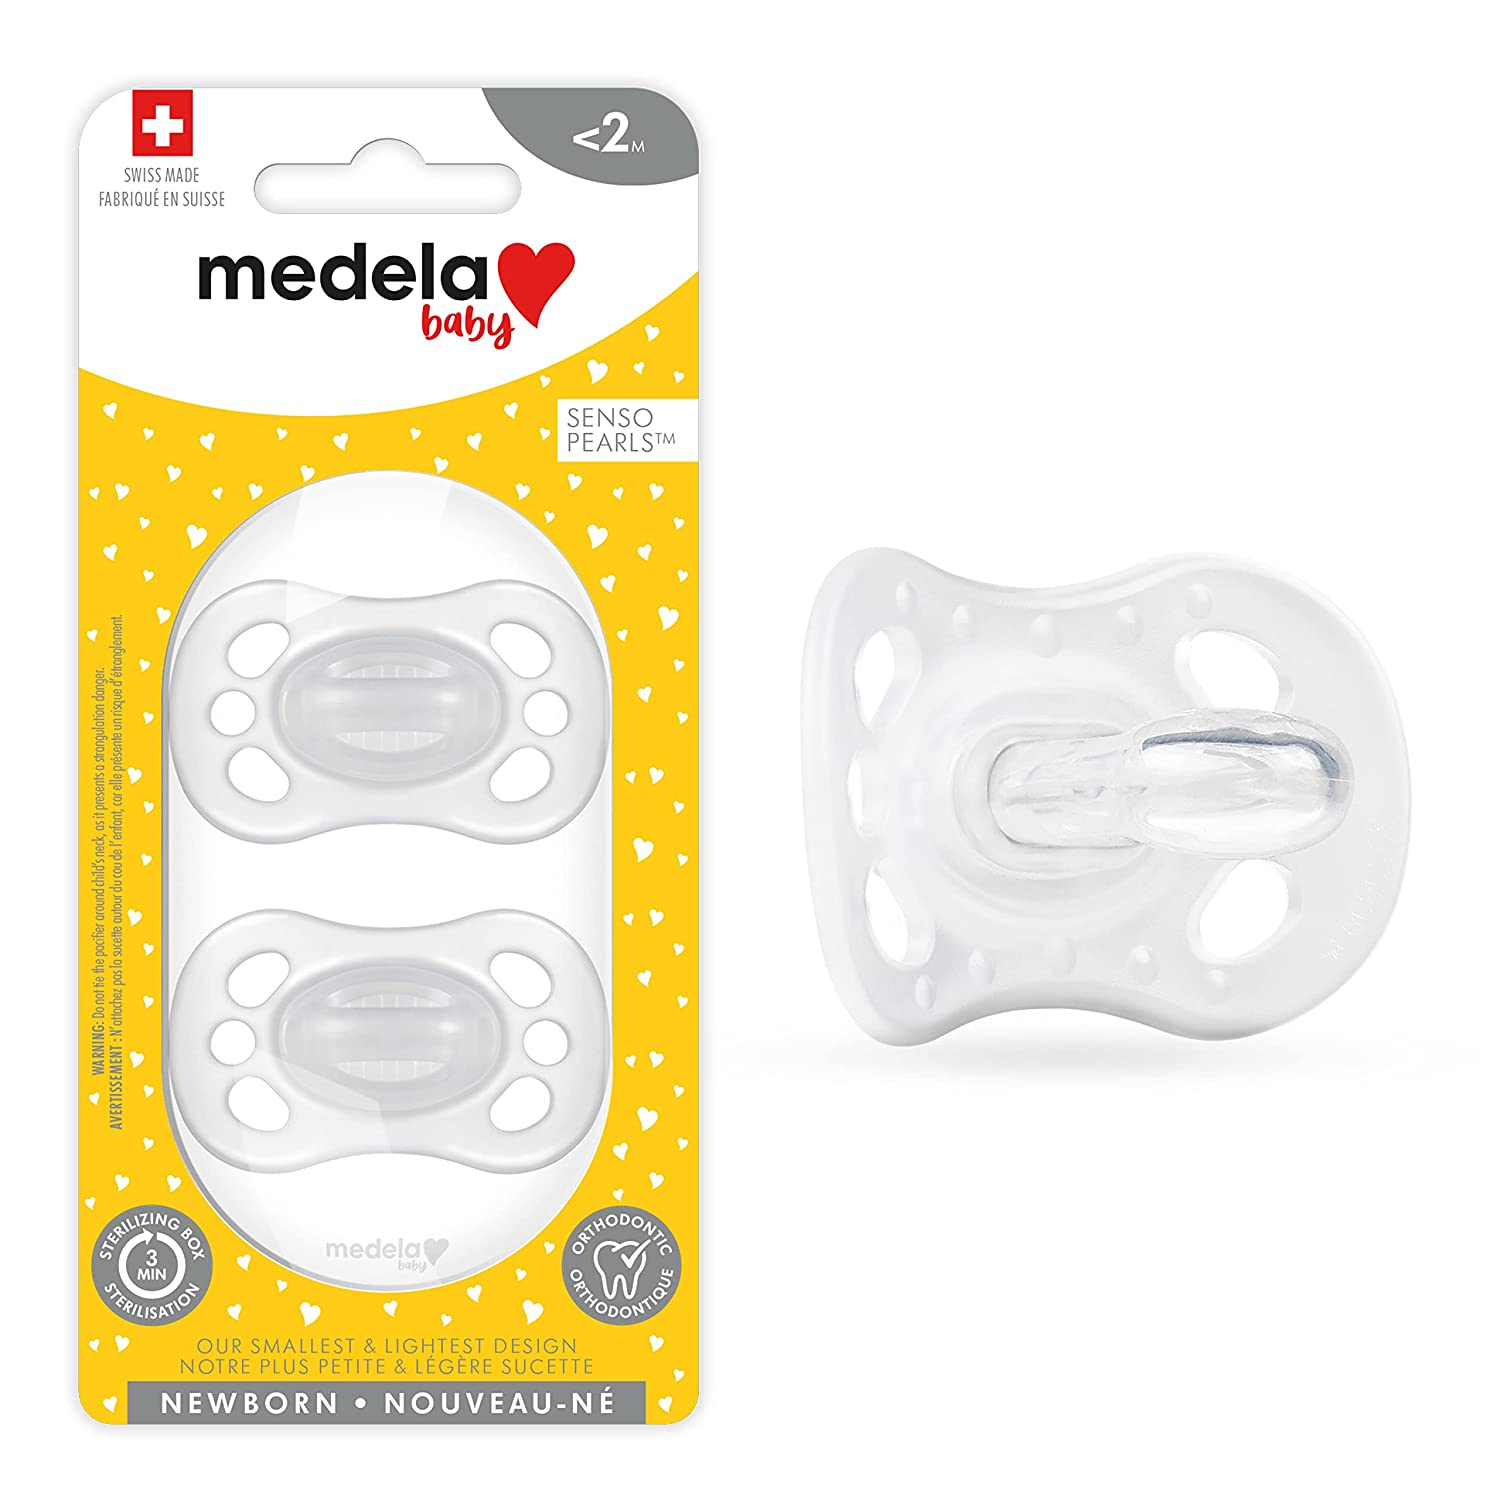 2-Pack Medela Baby Pacifier for Newborns $1 + Free Shipping w/ Prime or Orders $25+